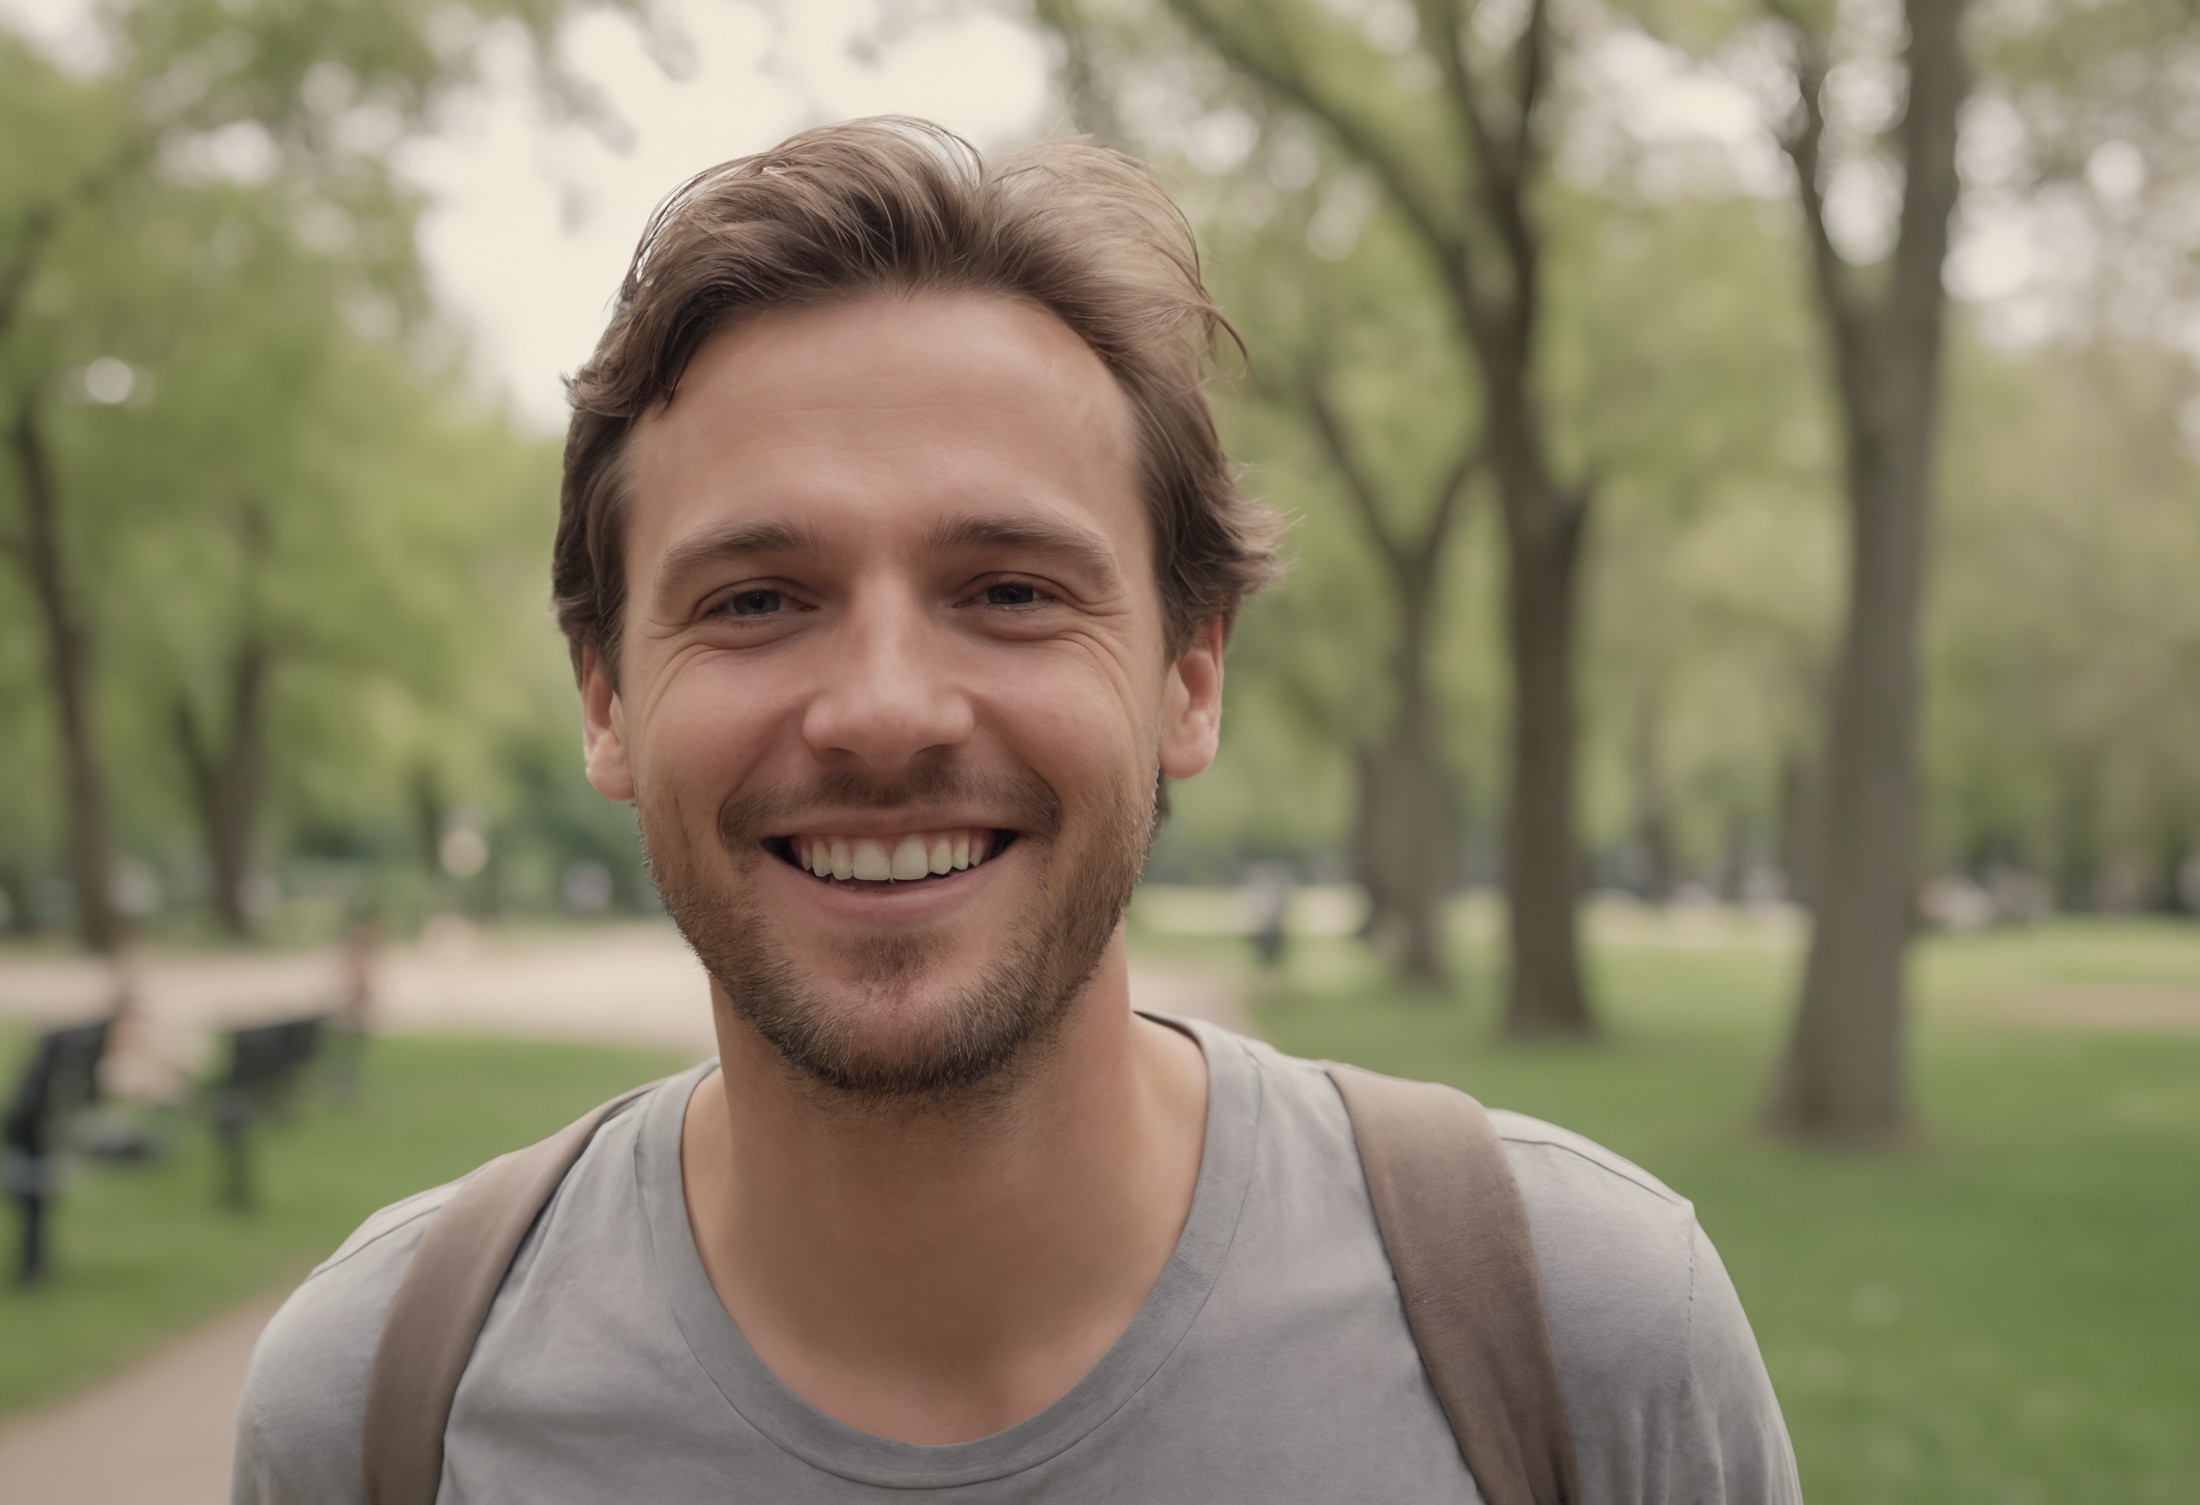 high quality close up dslr snapshot of a happy man walking through a park, high definition film grain photo taken at f/16,...